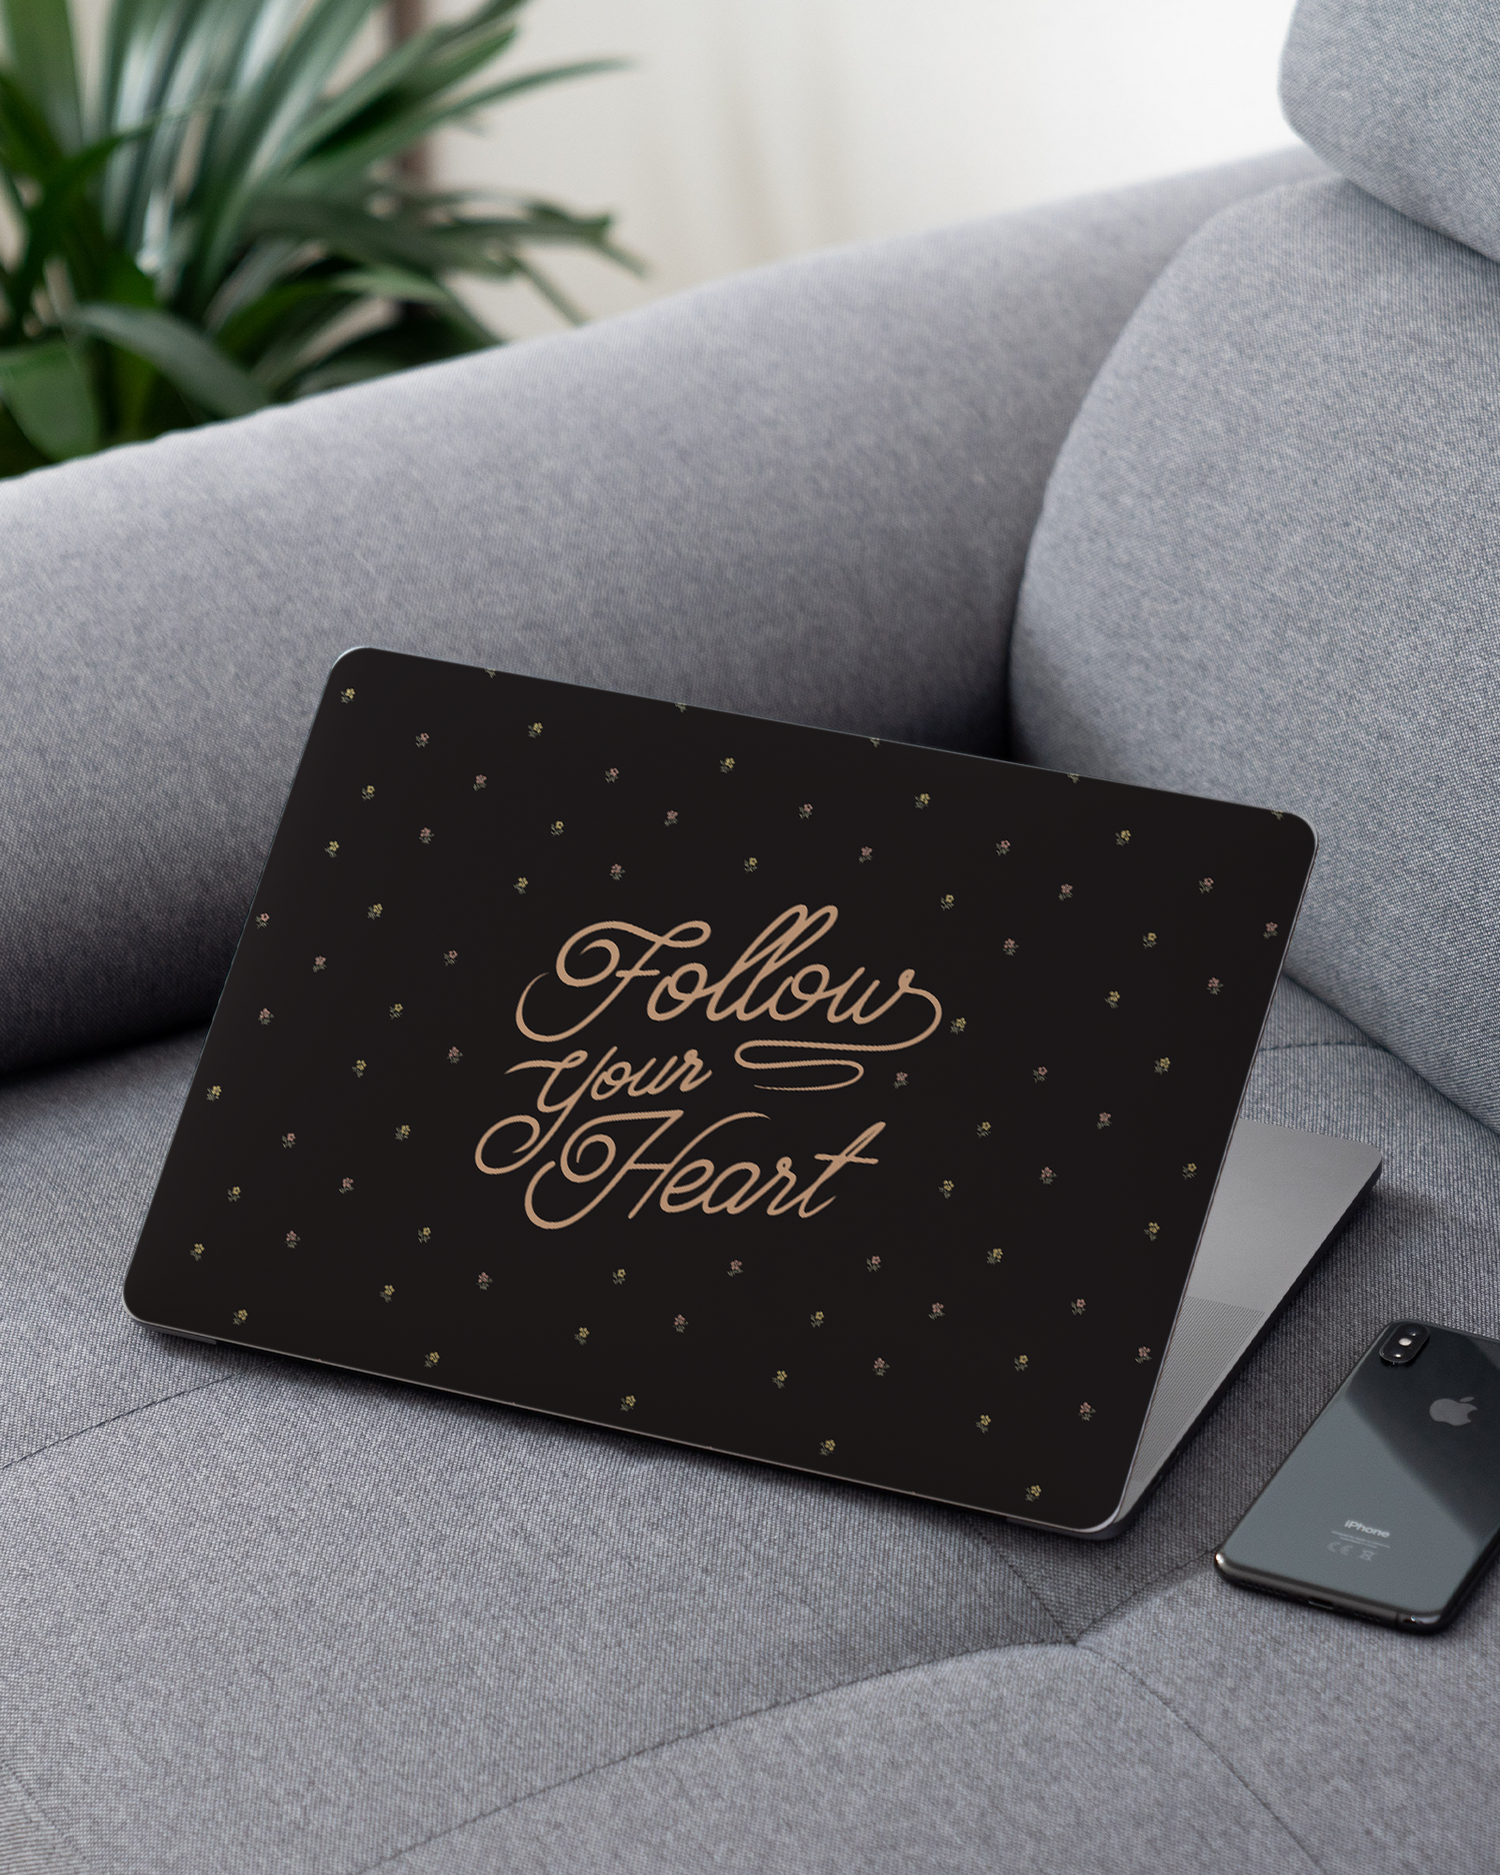 Follow Your Heart Laptop Skin for 13 inch Apple MacBooks on a couch